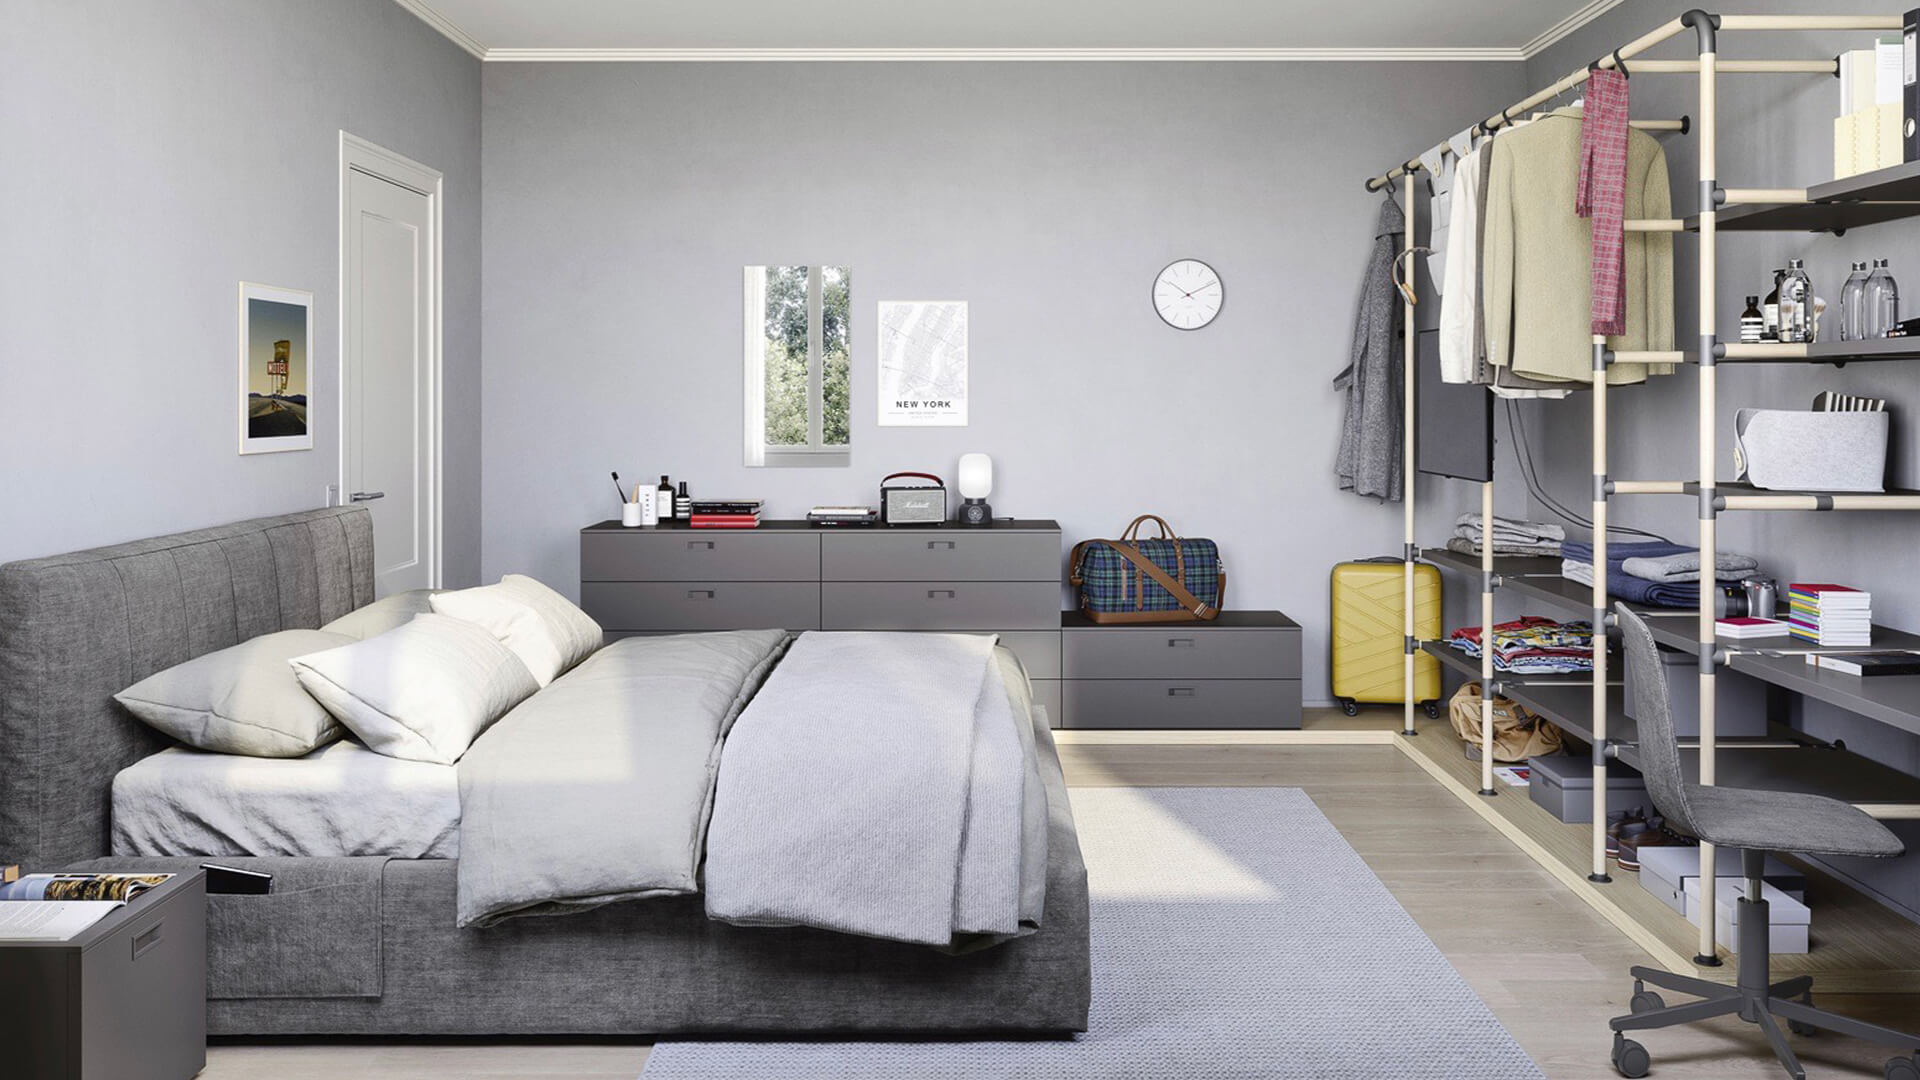 Blog IDW - Bedding: the new trends for 2020 for your bedroom